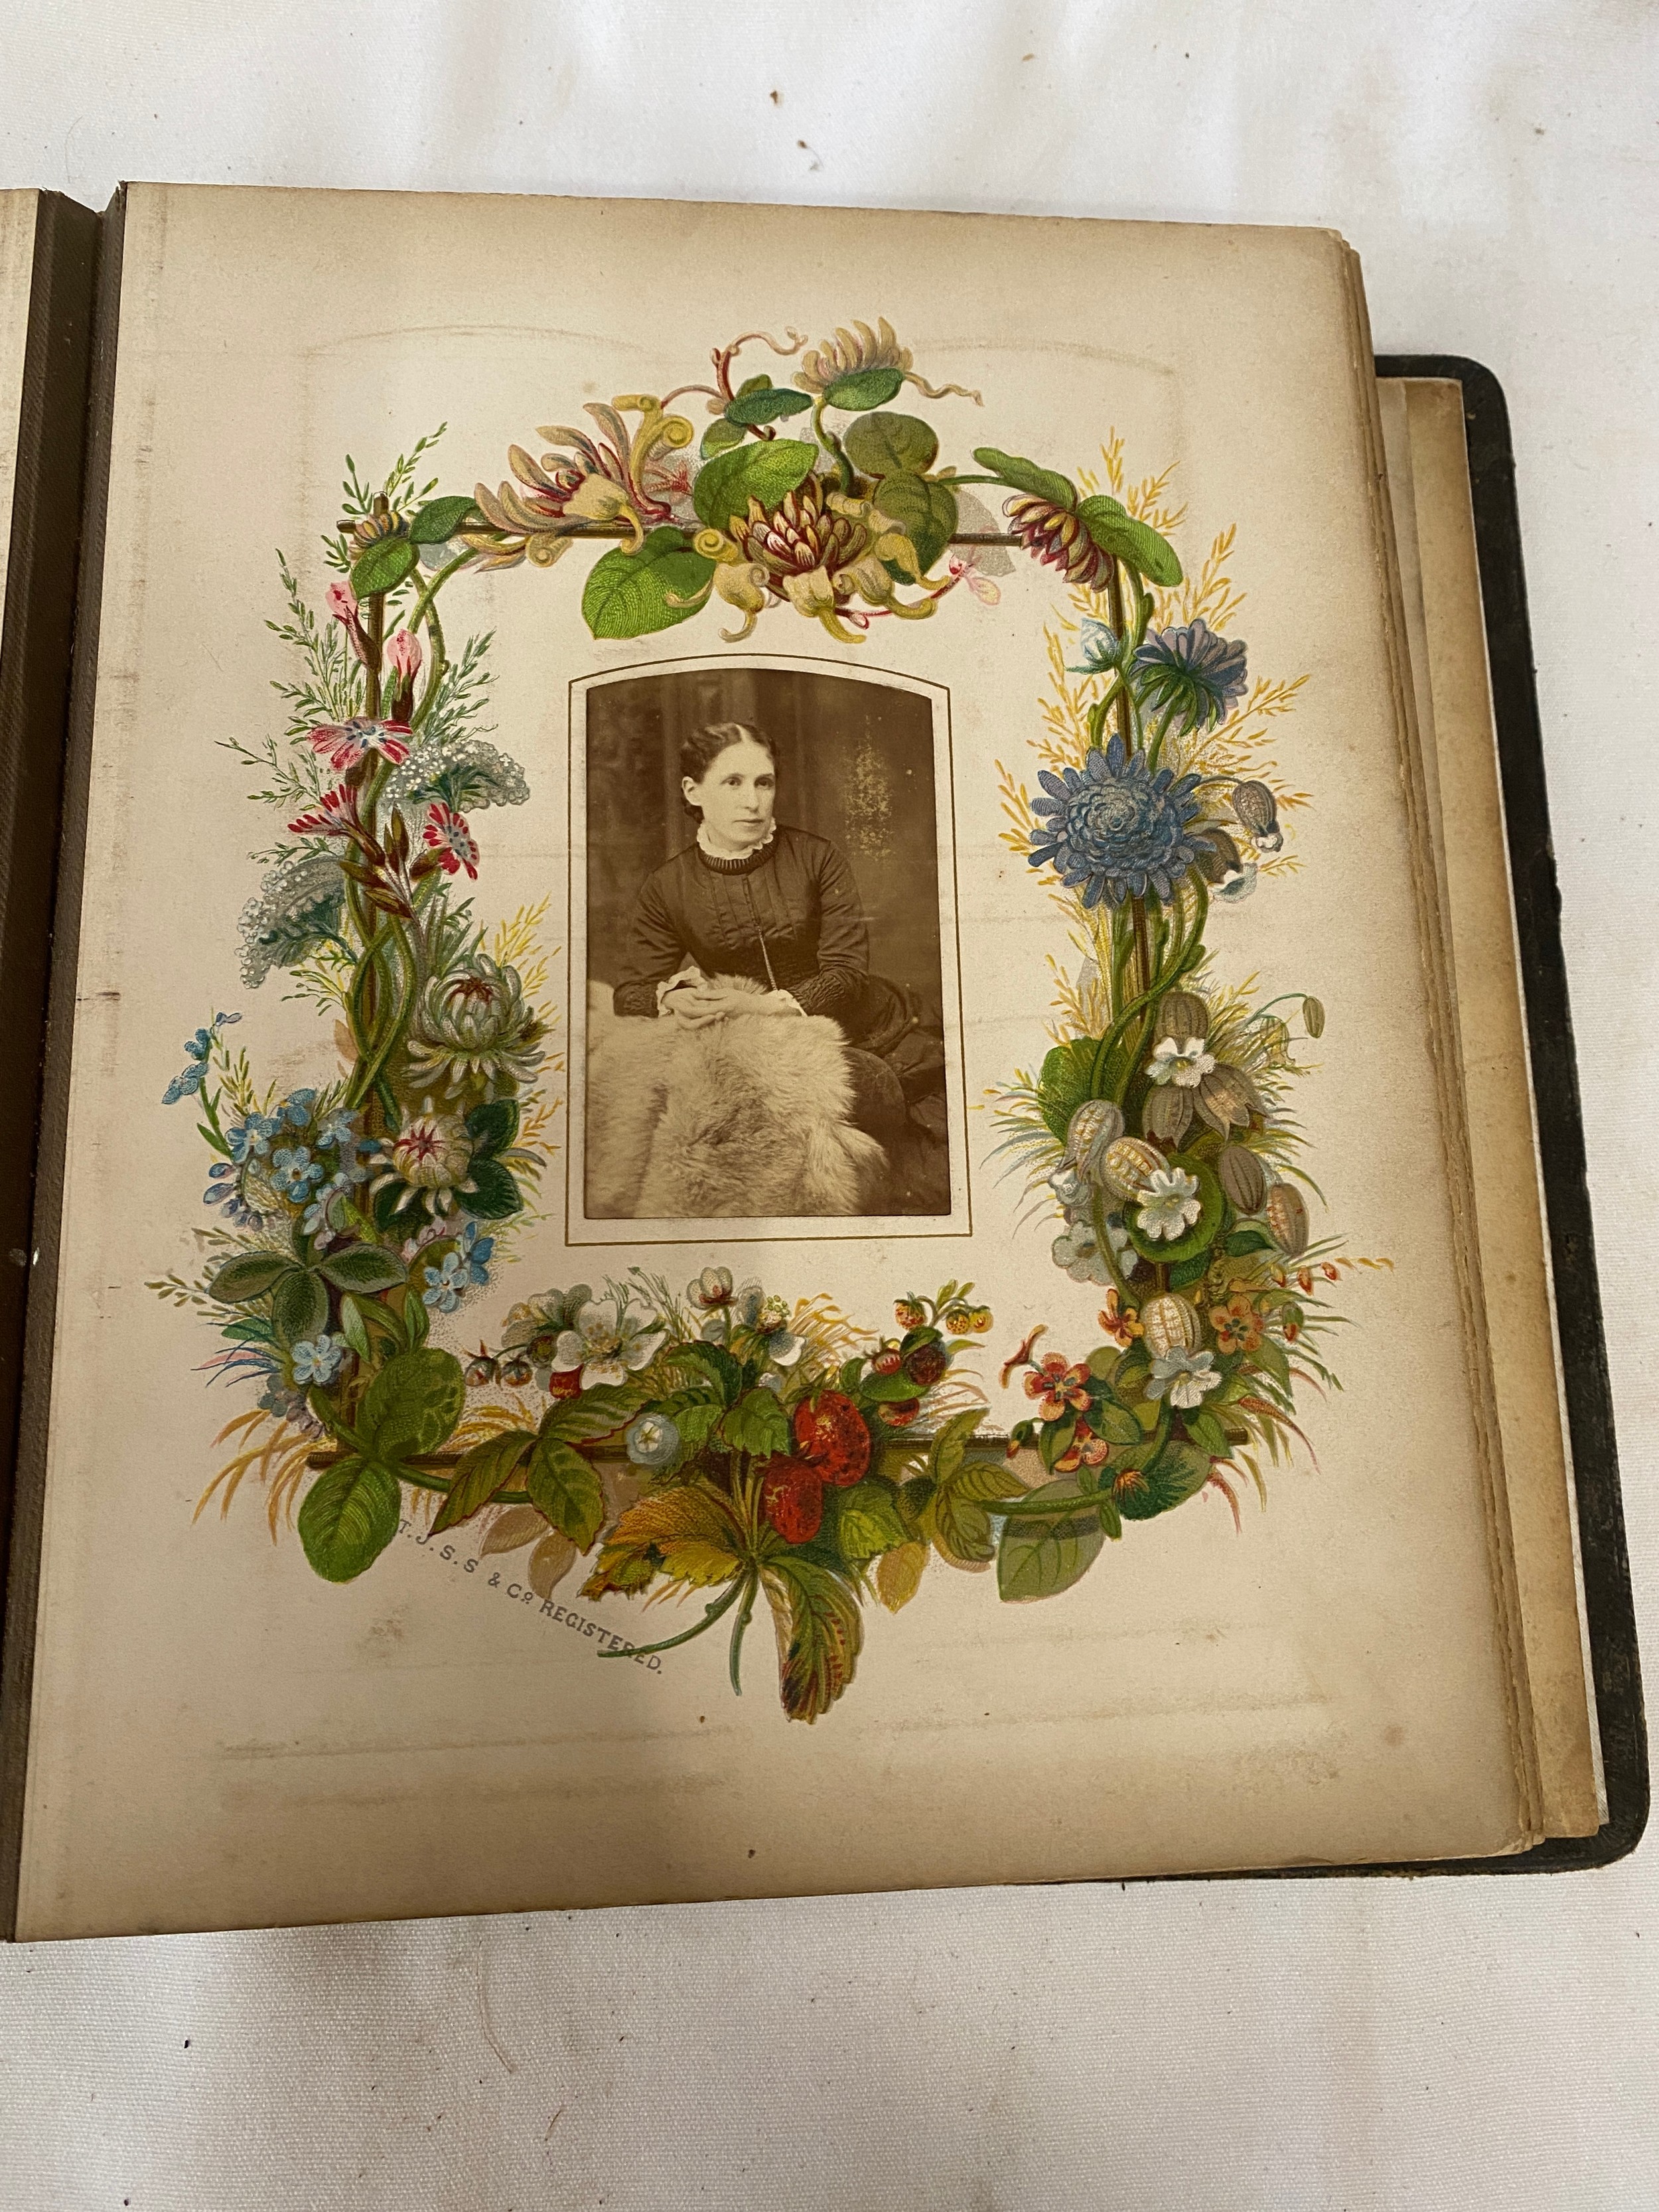 Photograph albums; Saltley College X'mas 1887 presented to Thomas Withers by his fellow students - Image 5 of 30